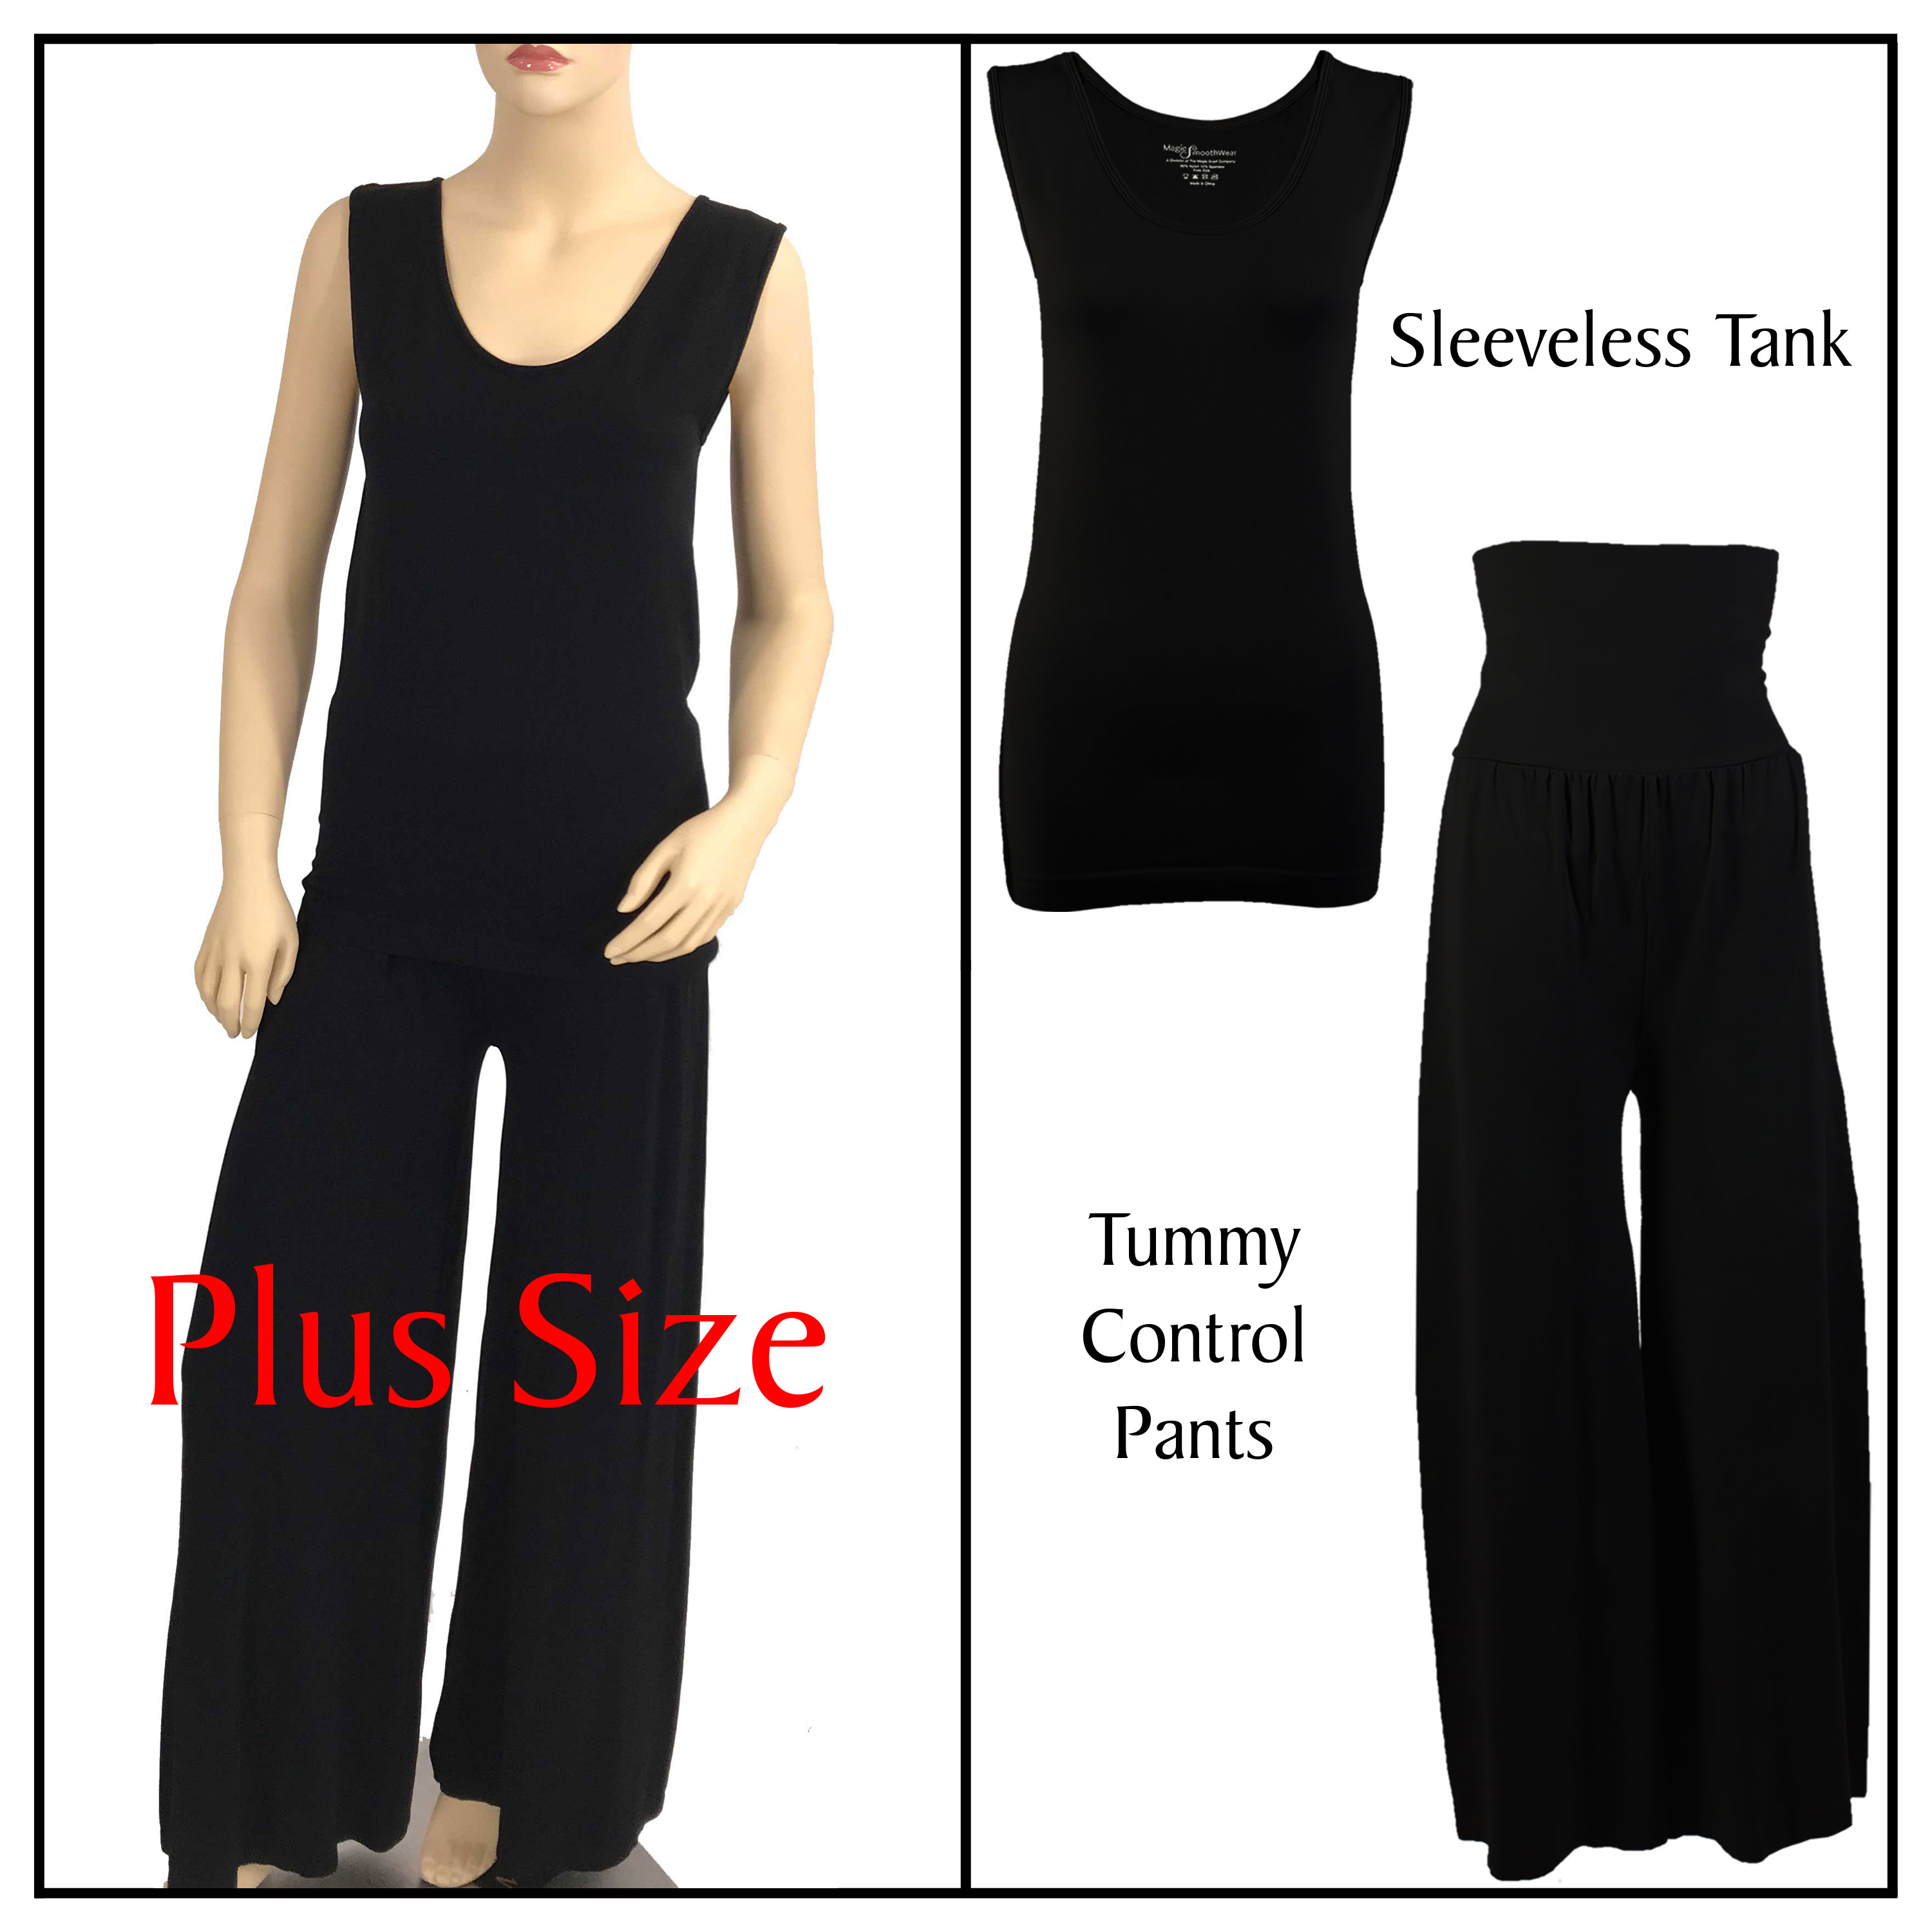 Black Sleeveless Top (Plus Size) with Pants